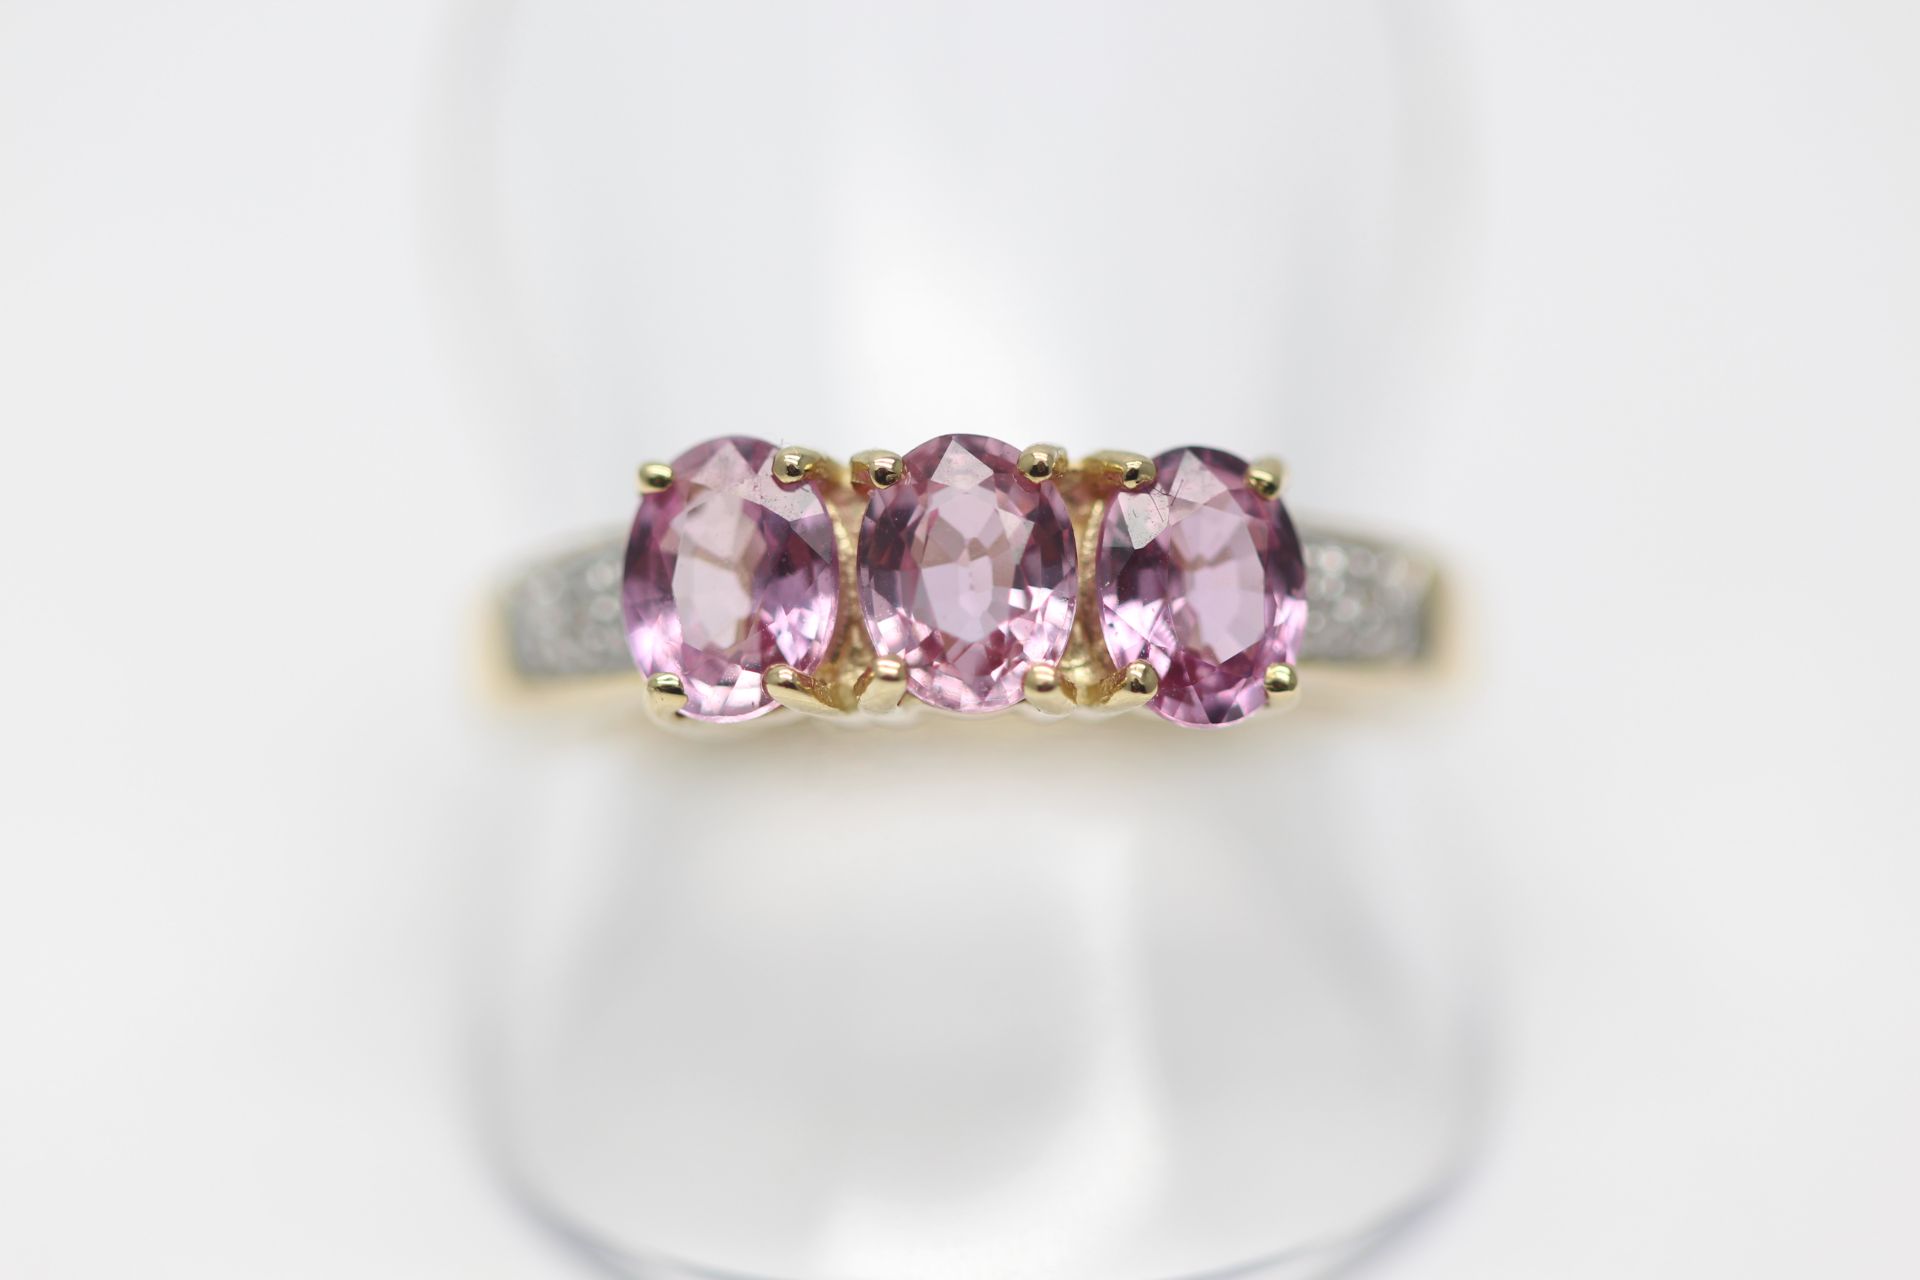 SOLID YELLOW GOLD LADIES RING SET WITH 1.50 CARATS OF NATURAL PINK SAPPIRES AND DIAMONDS (PV-JH)